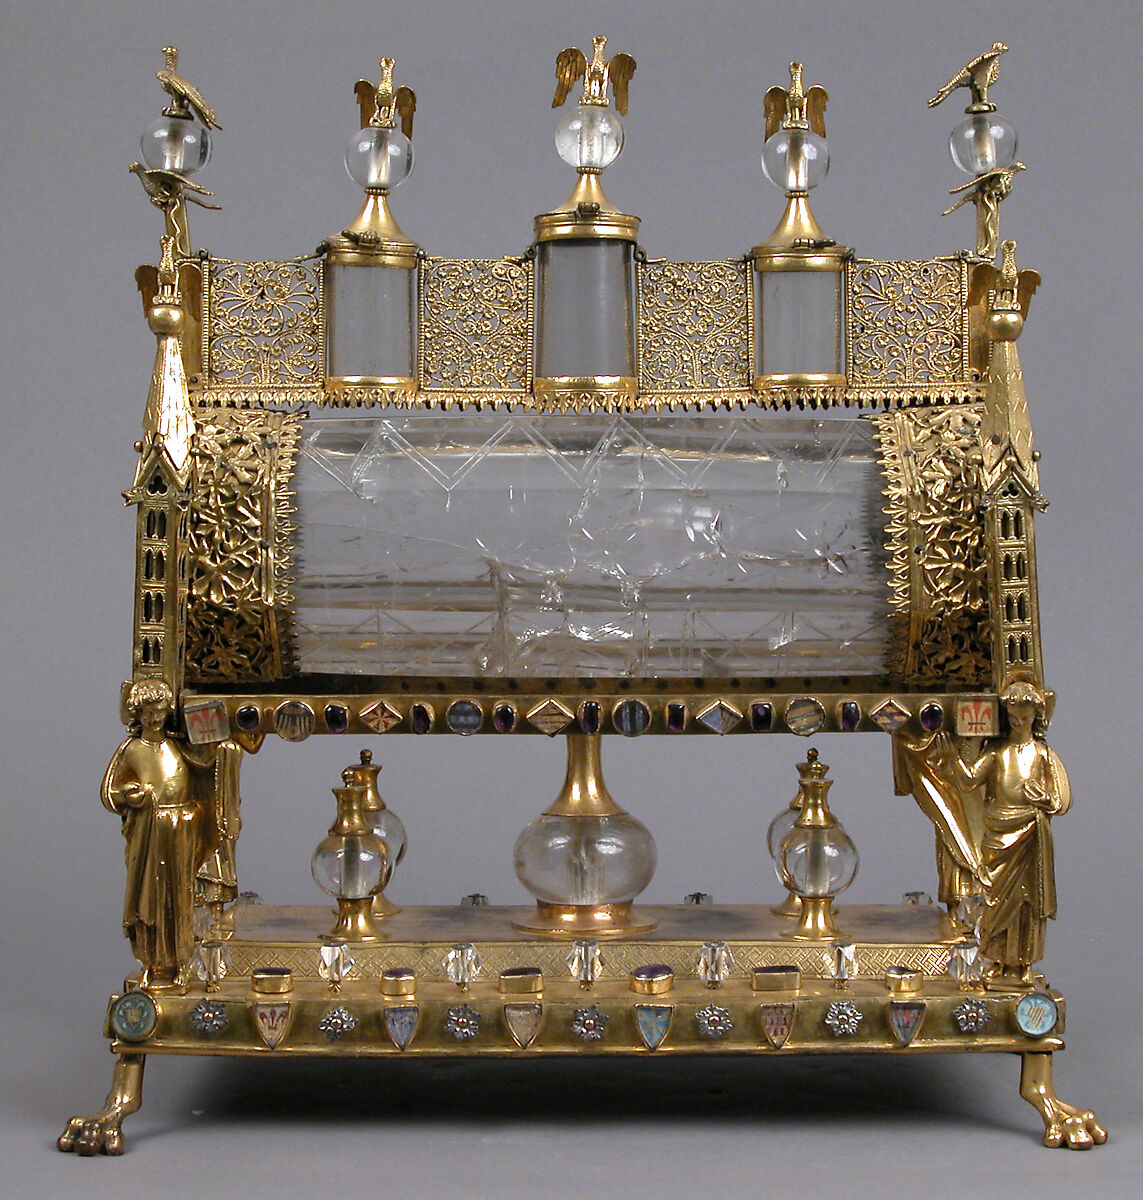 Reliquary, Gilded copper, rock crystal, glass, and parchment, French (?) 